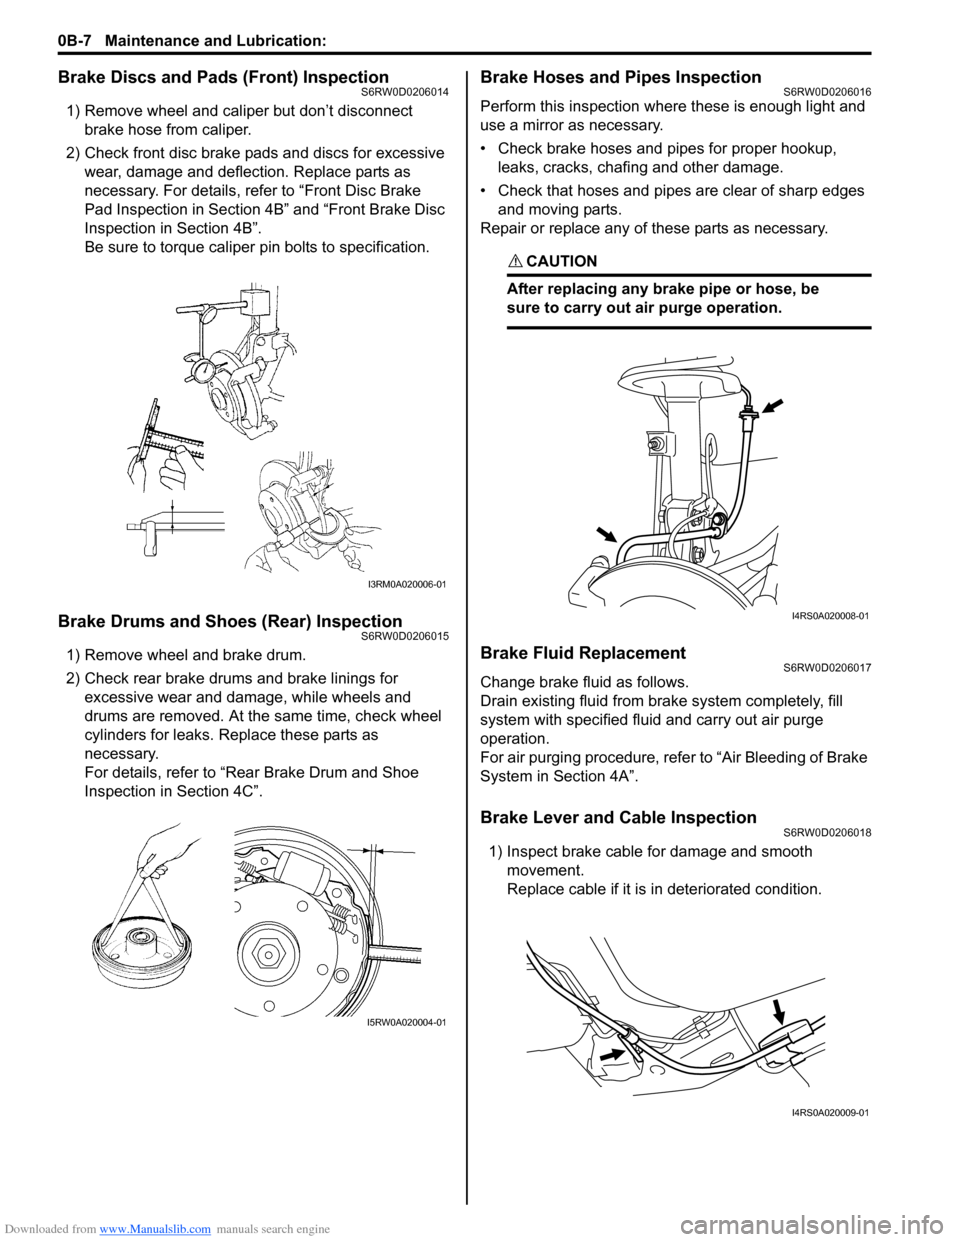 SUZUKI SX4 2006 1.G Service User Guide Downloaded from www.Manualslib.com manuals search engine 0B-7 Maintenance and Lubrication: 
Brake Discs and Pads (Front) InspectionS6RW0D0206014
1) Remove wheel and caliper but don’t disconnect 
bra